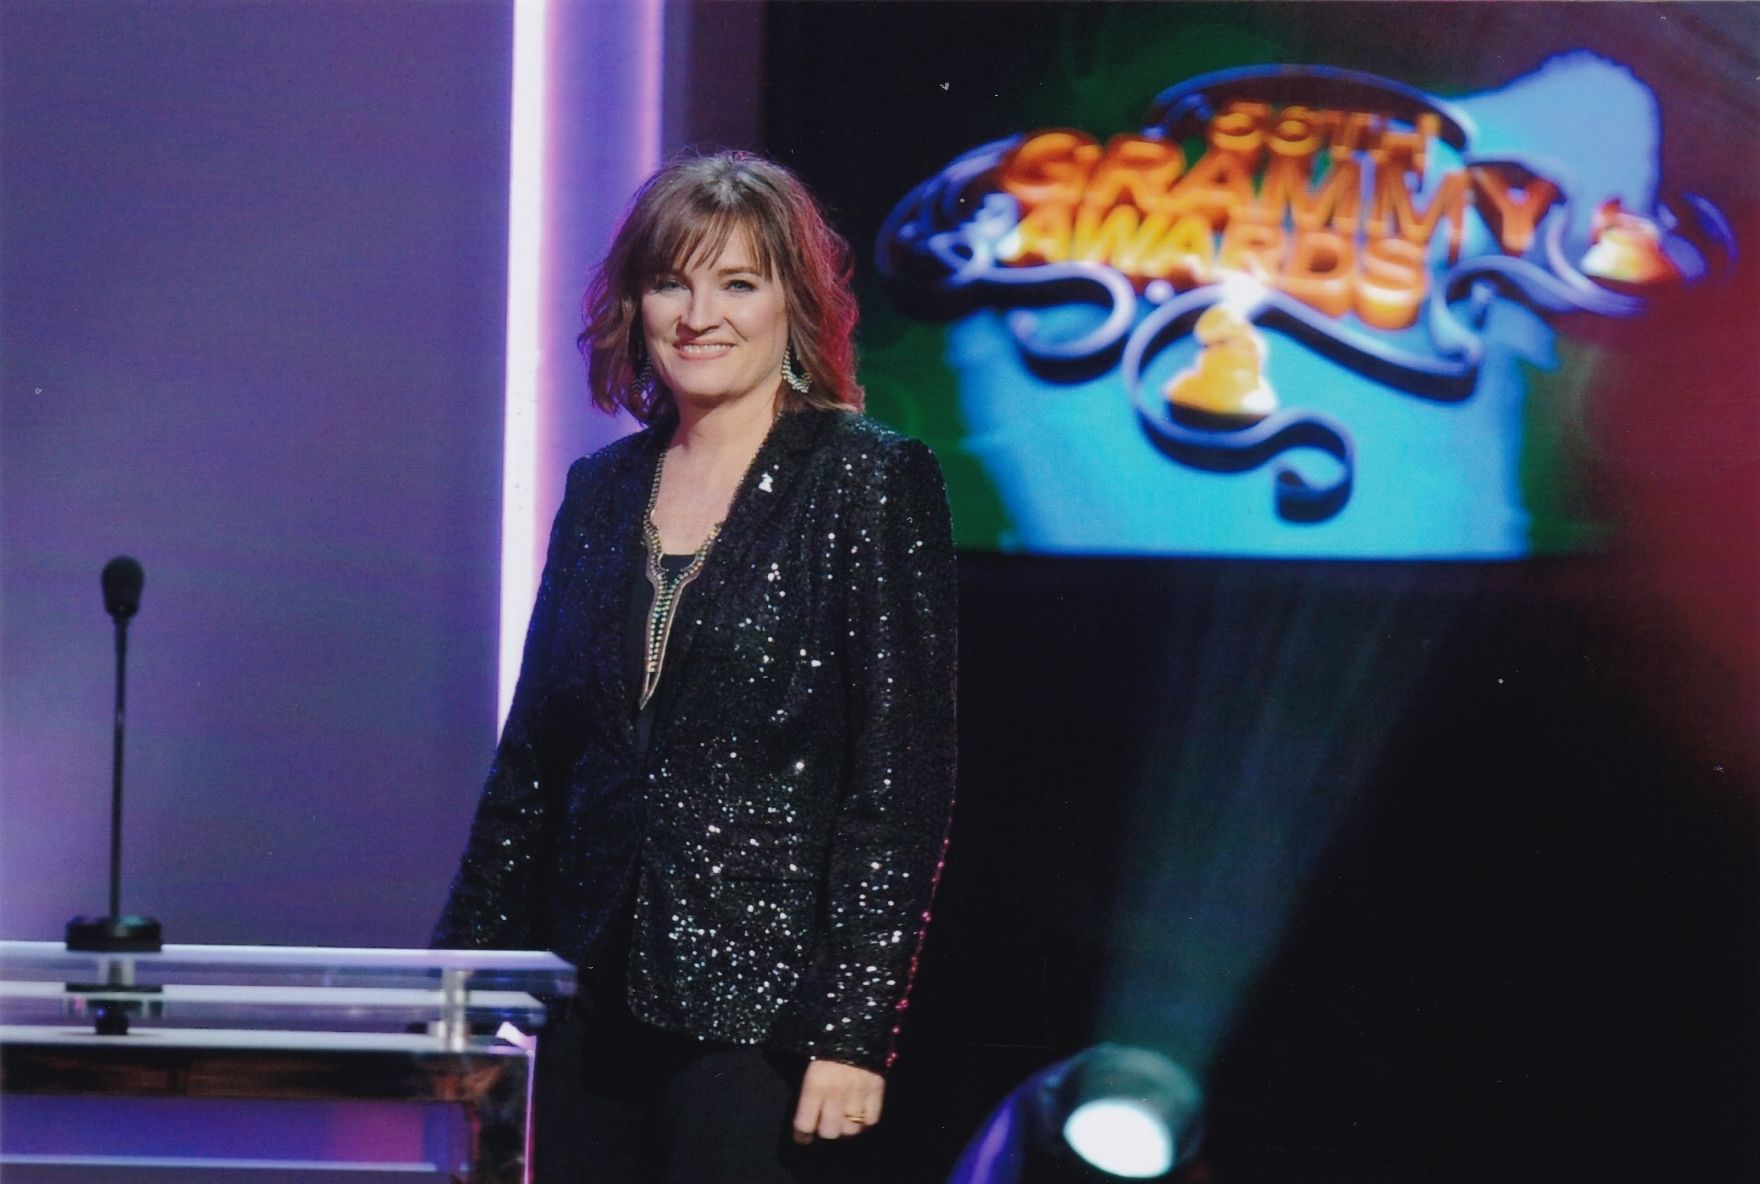 Christine Albert speaks at the 56th Annual GRAMMYs®. Photo courtesy of the Recording Academy®